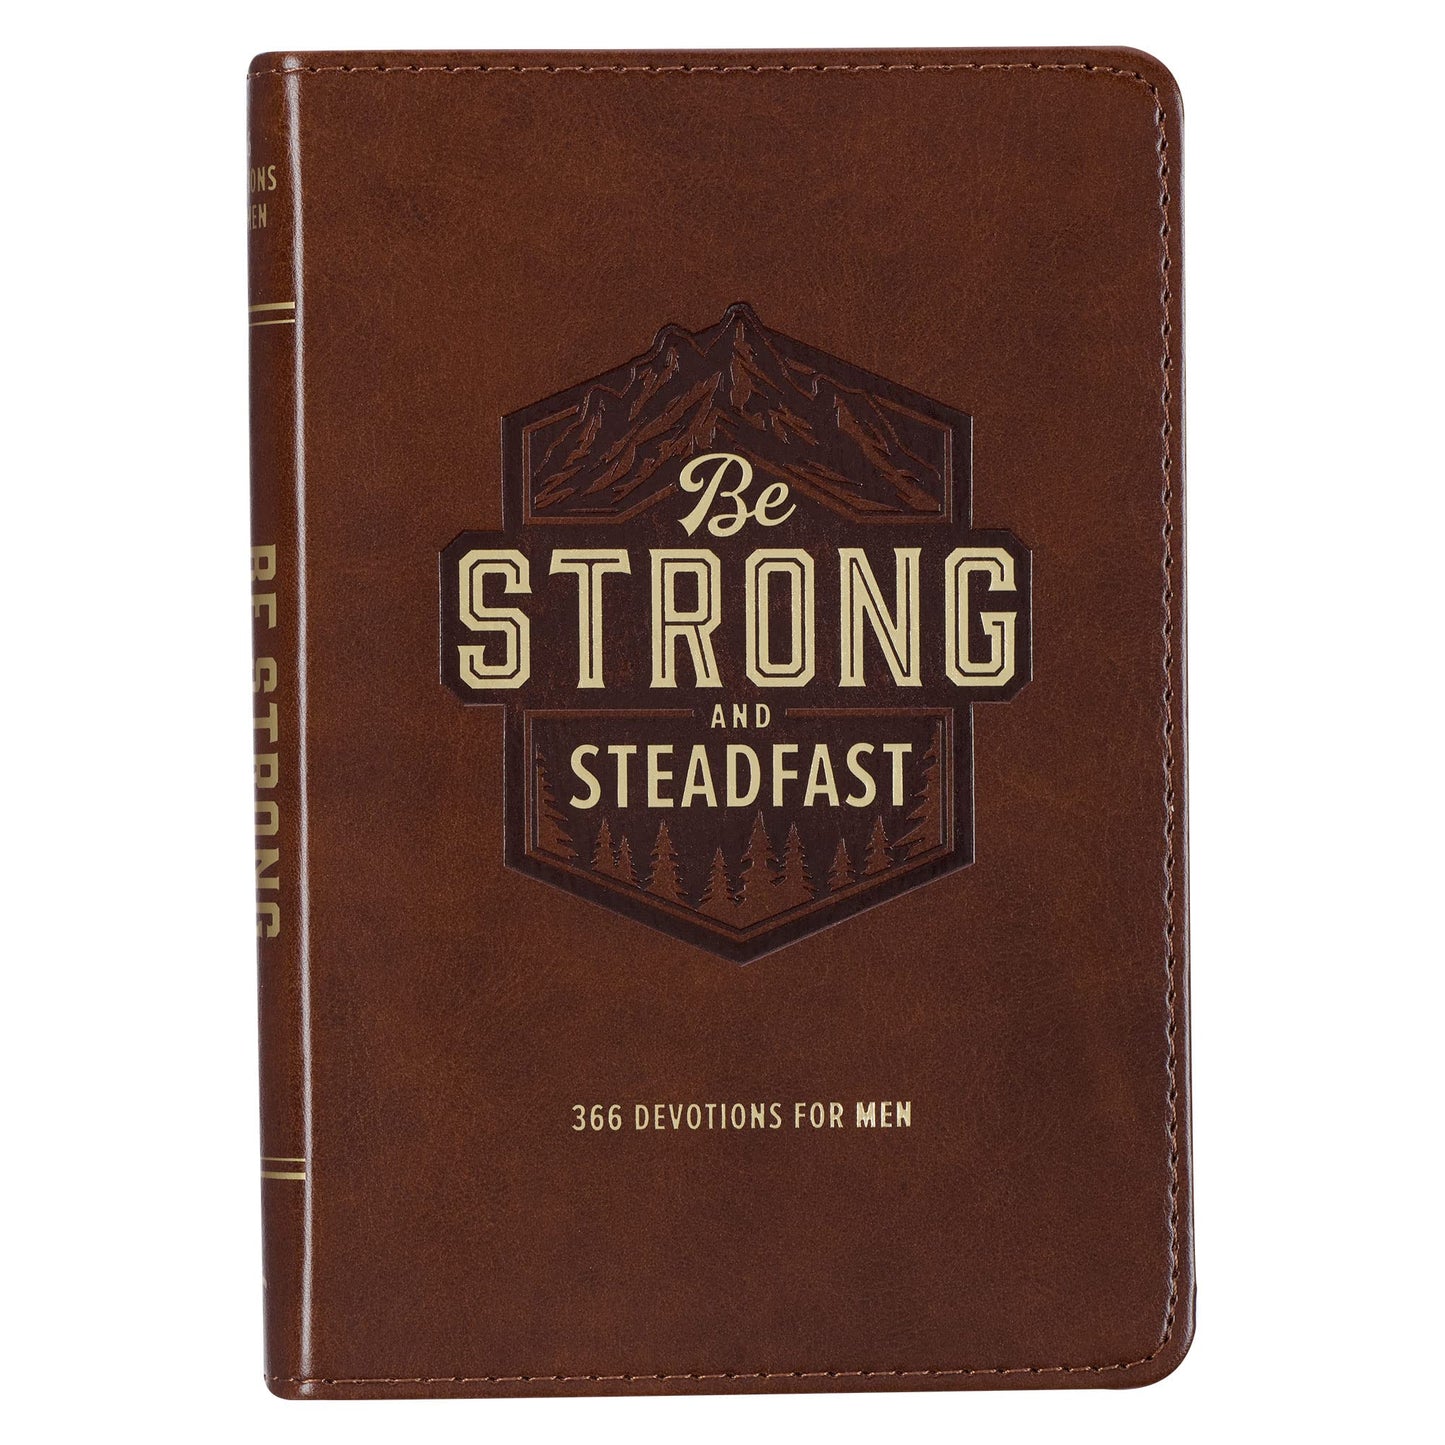 Be Strong and Steadfast 366 Devotions for Men